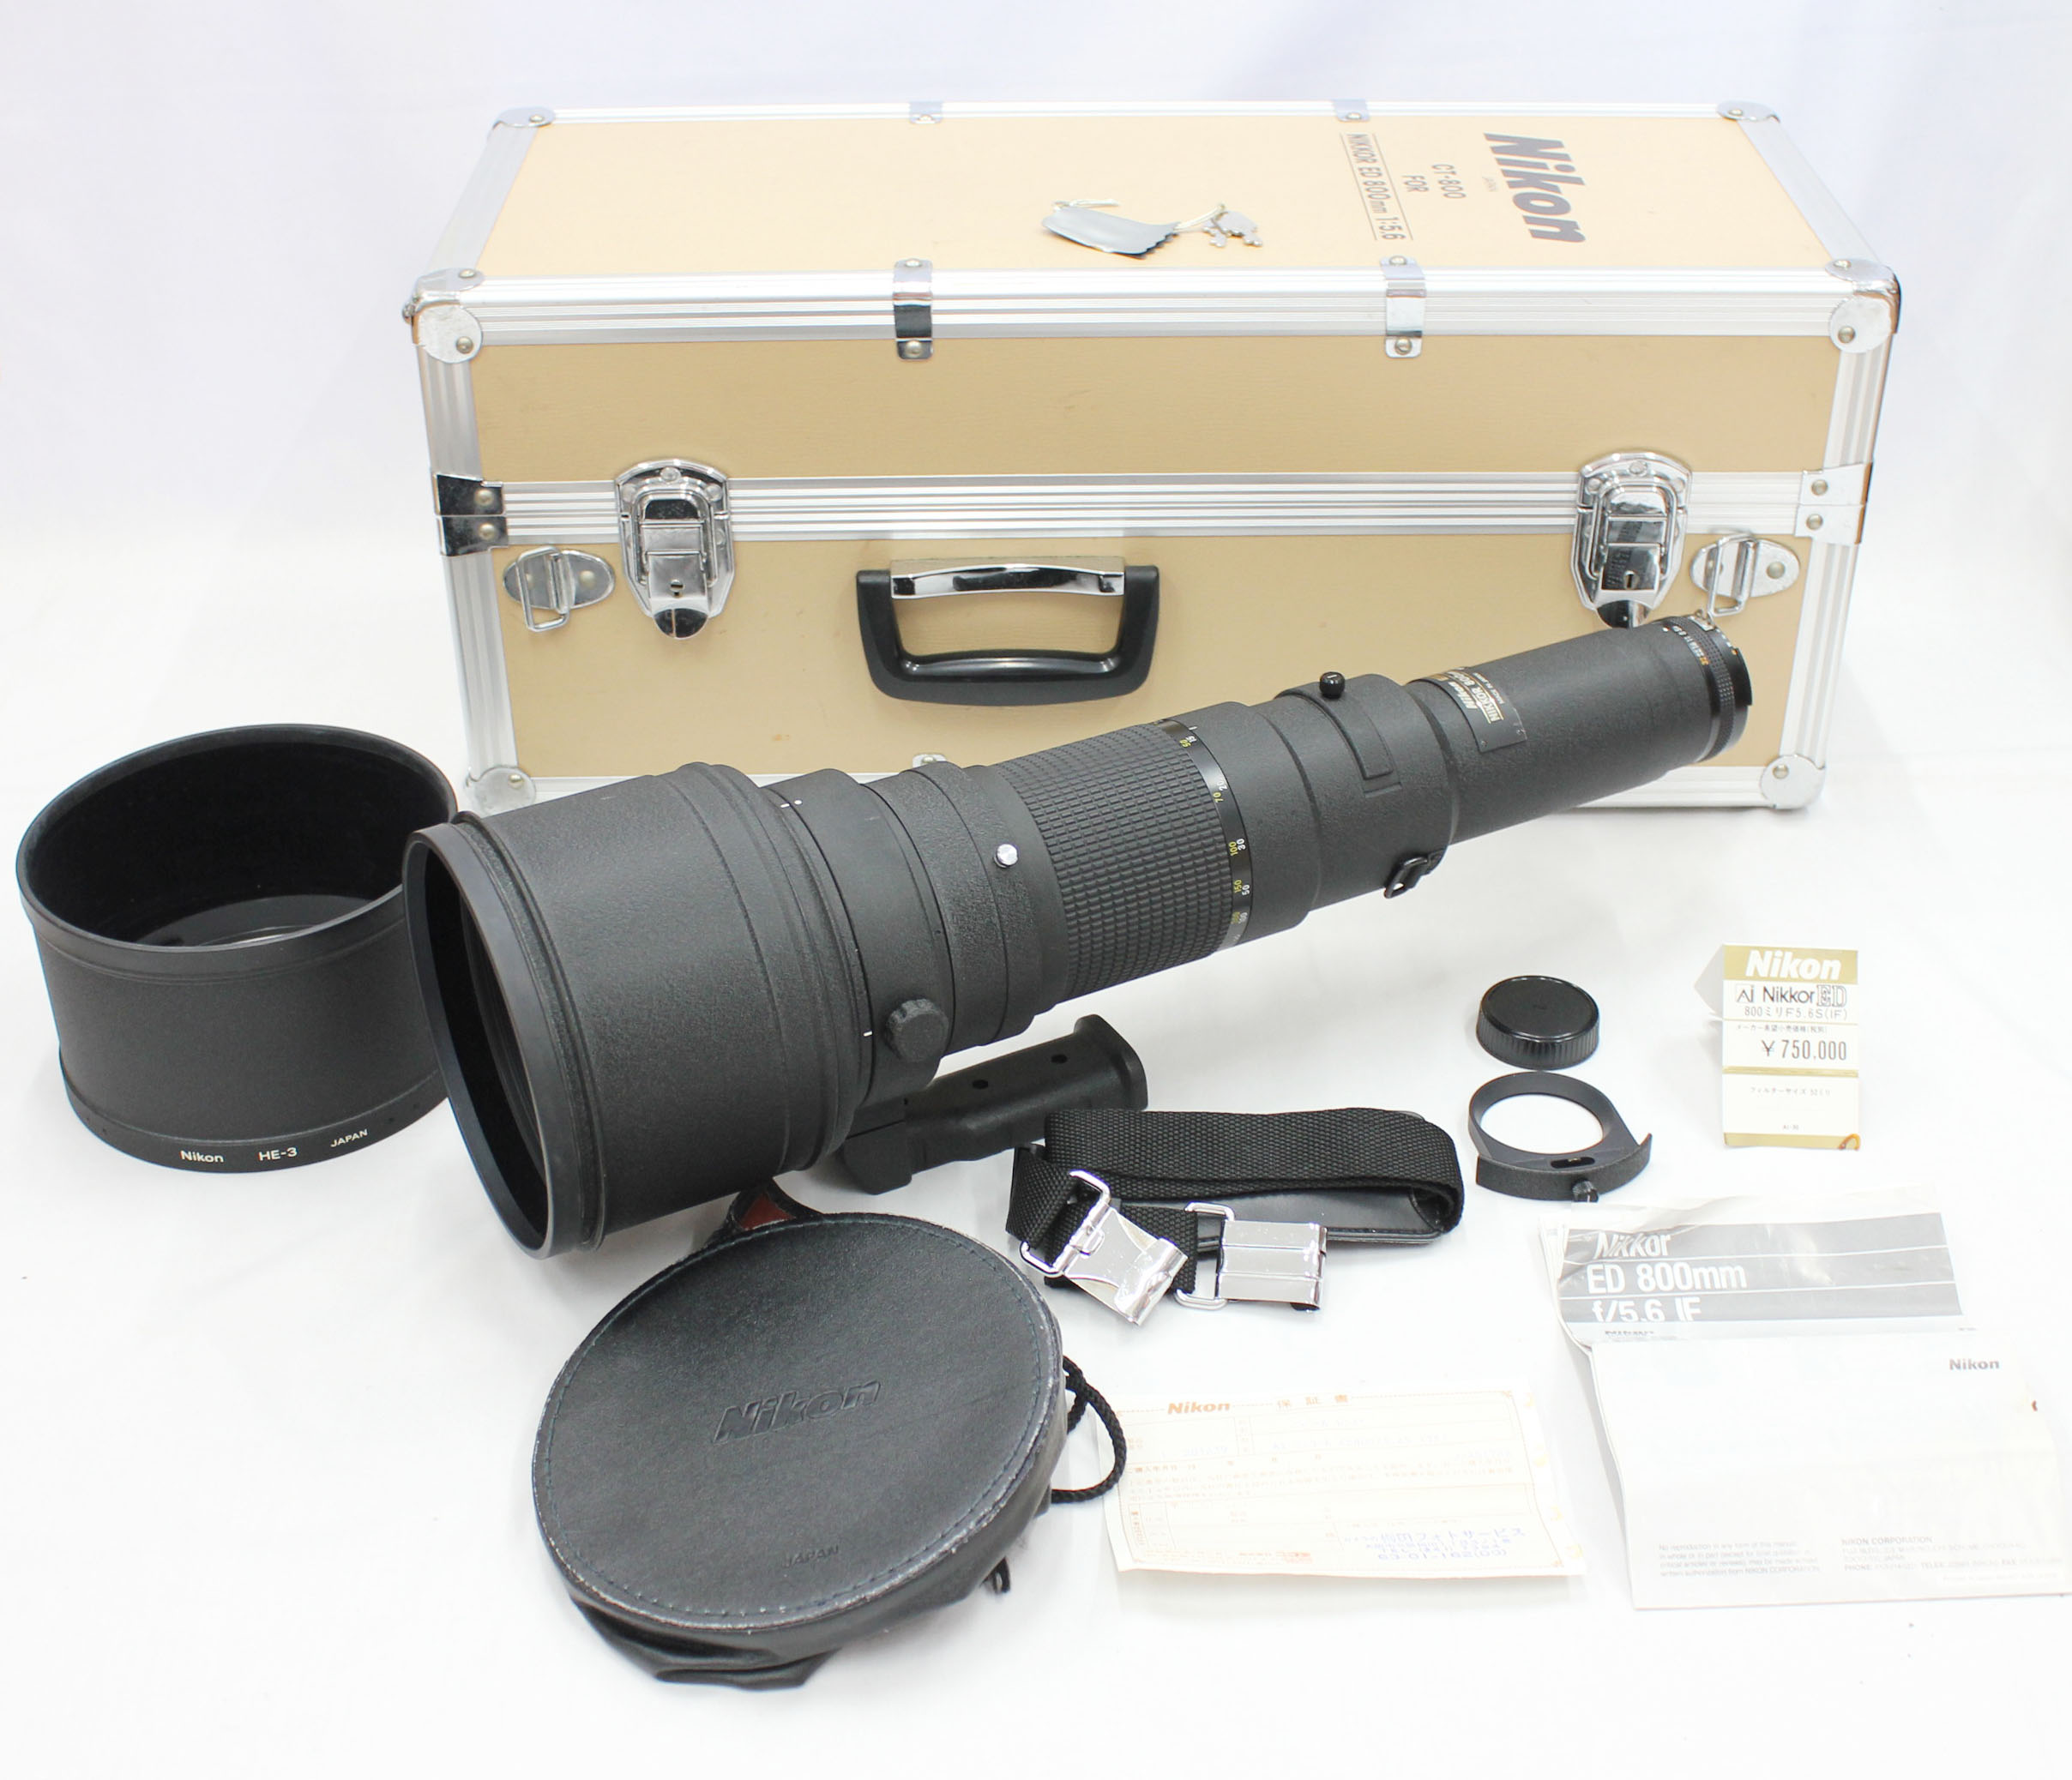  Nikon Ai-s Ais Nikkor ED 800mm F/5.6 IF Telephoto Lens in Case from Japan Photo 0